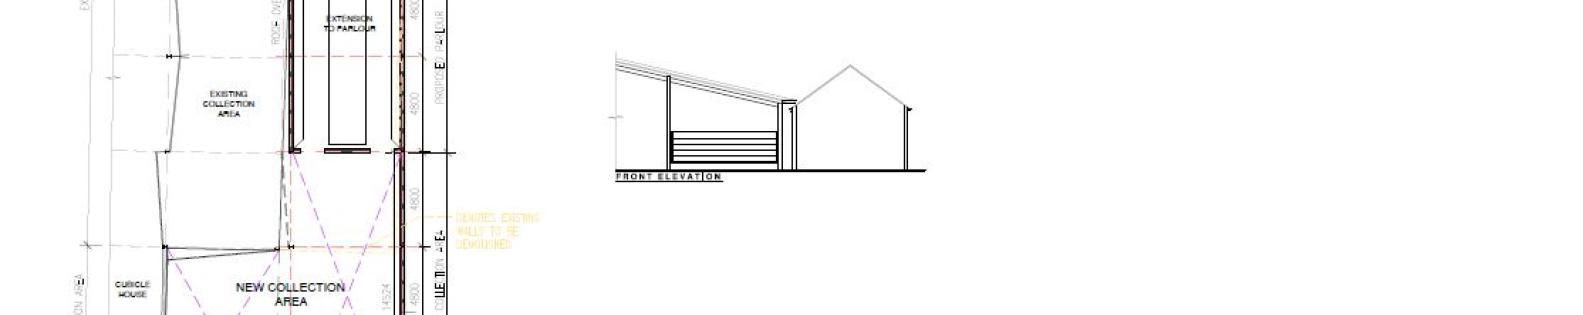 extension to farm shed 